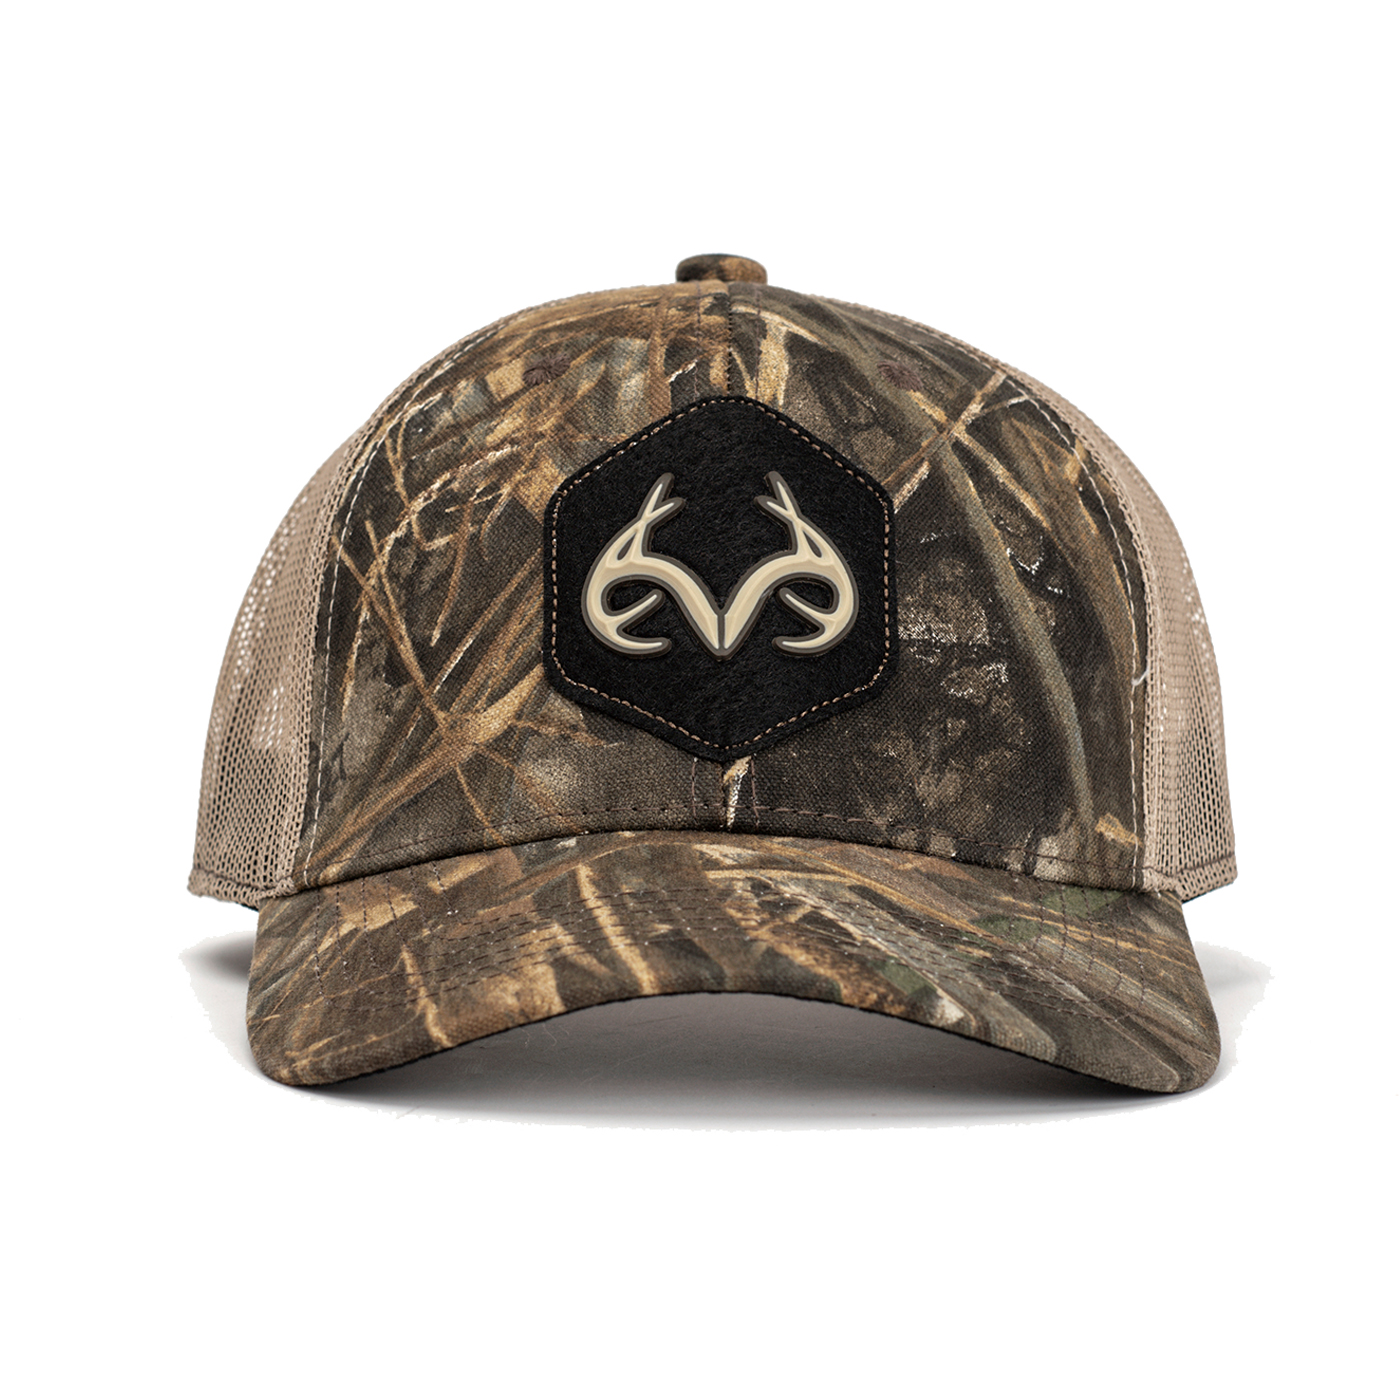 Realtree Max-7 Camo Shield Patch Hat, Size: One Size